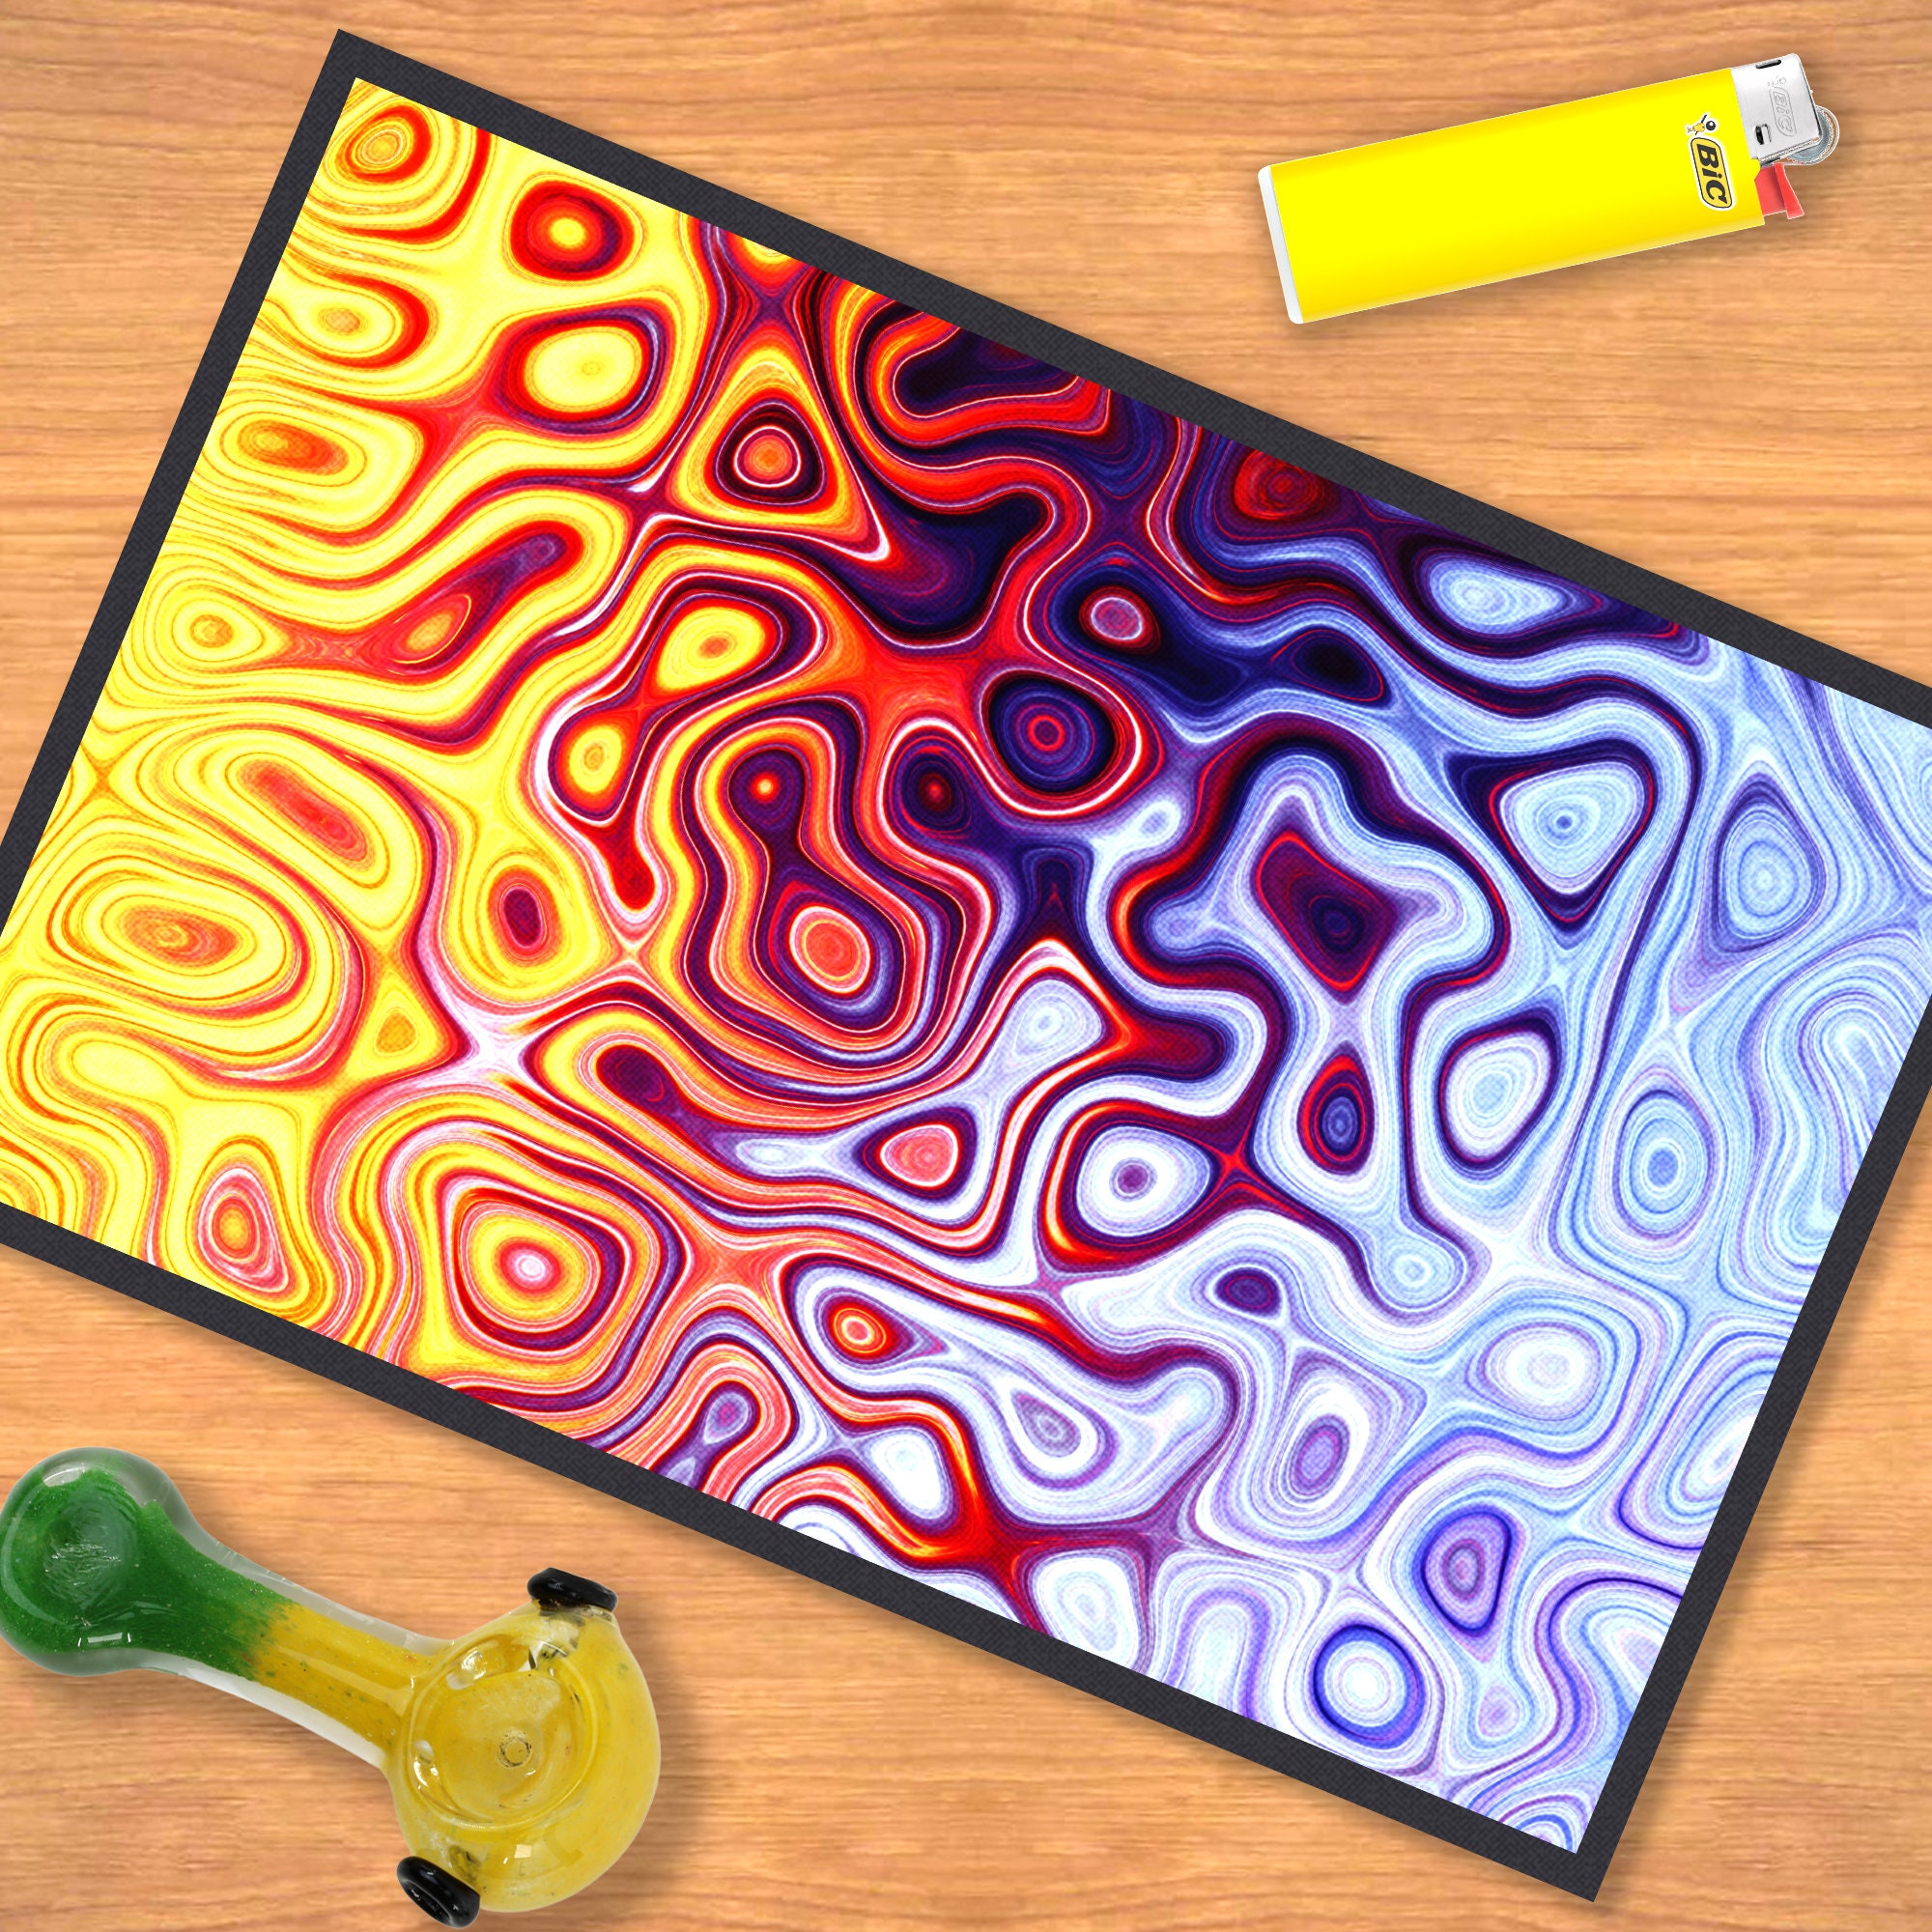 Dunder Splifflin Silicone Dab Mat/pad Gag Gift Office / Mouse Pad Smoking  Accessory 